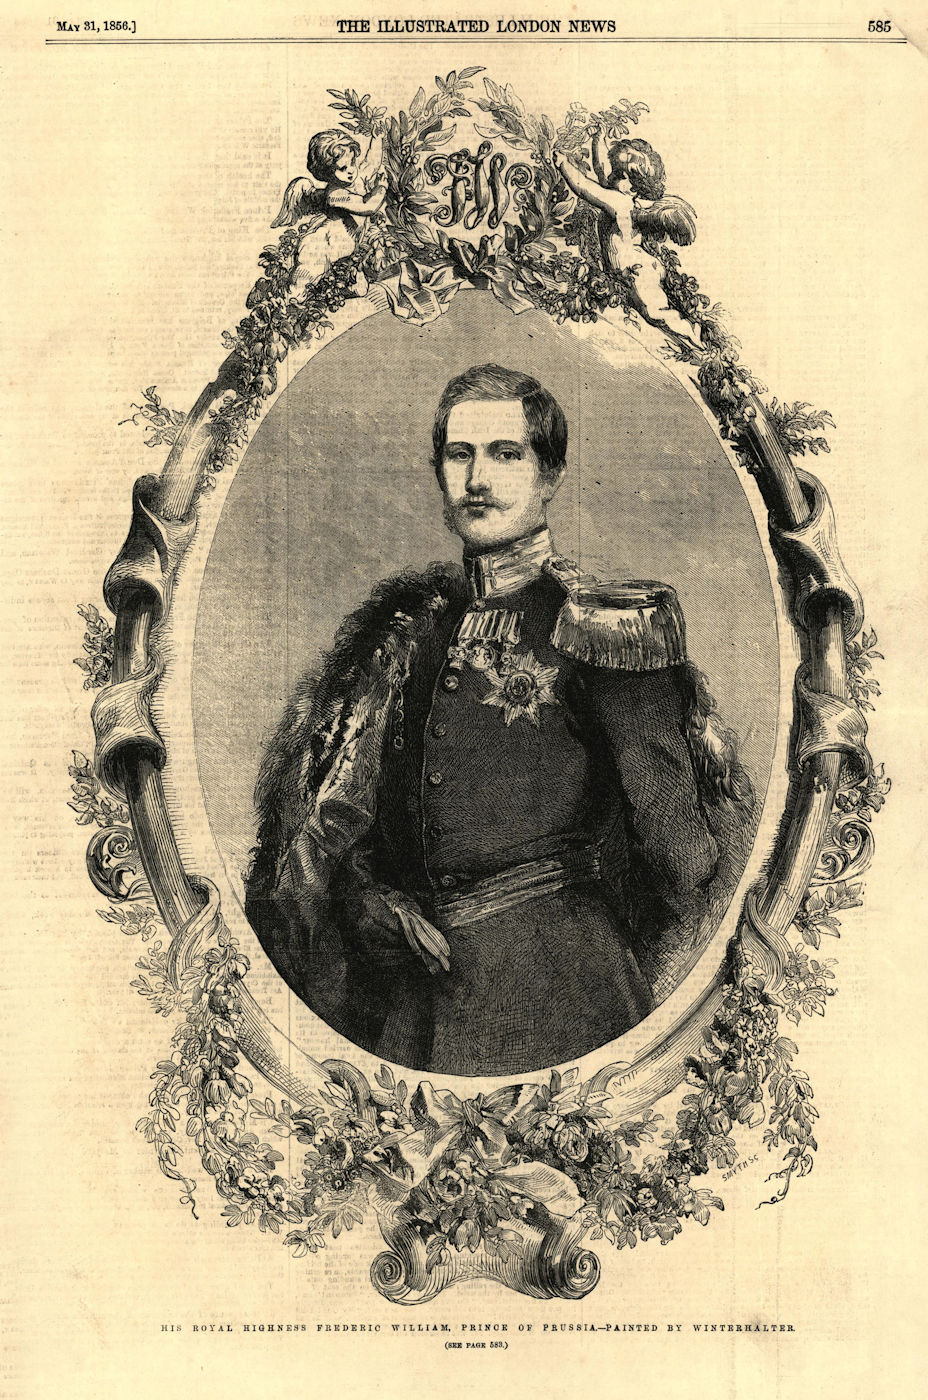 His Royal Highness Frederic William, Prince of Prussia. Royalty 1856 old print